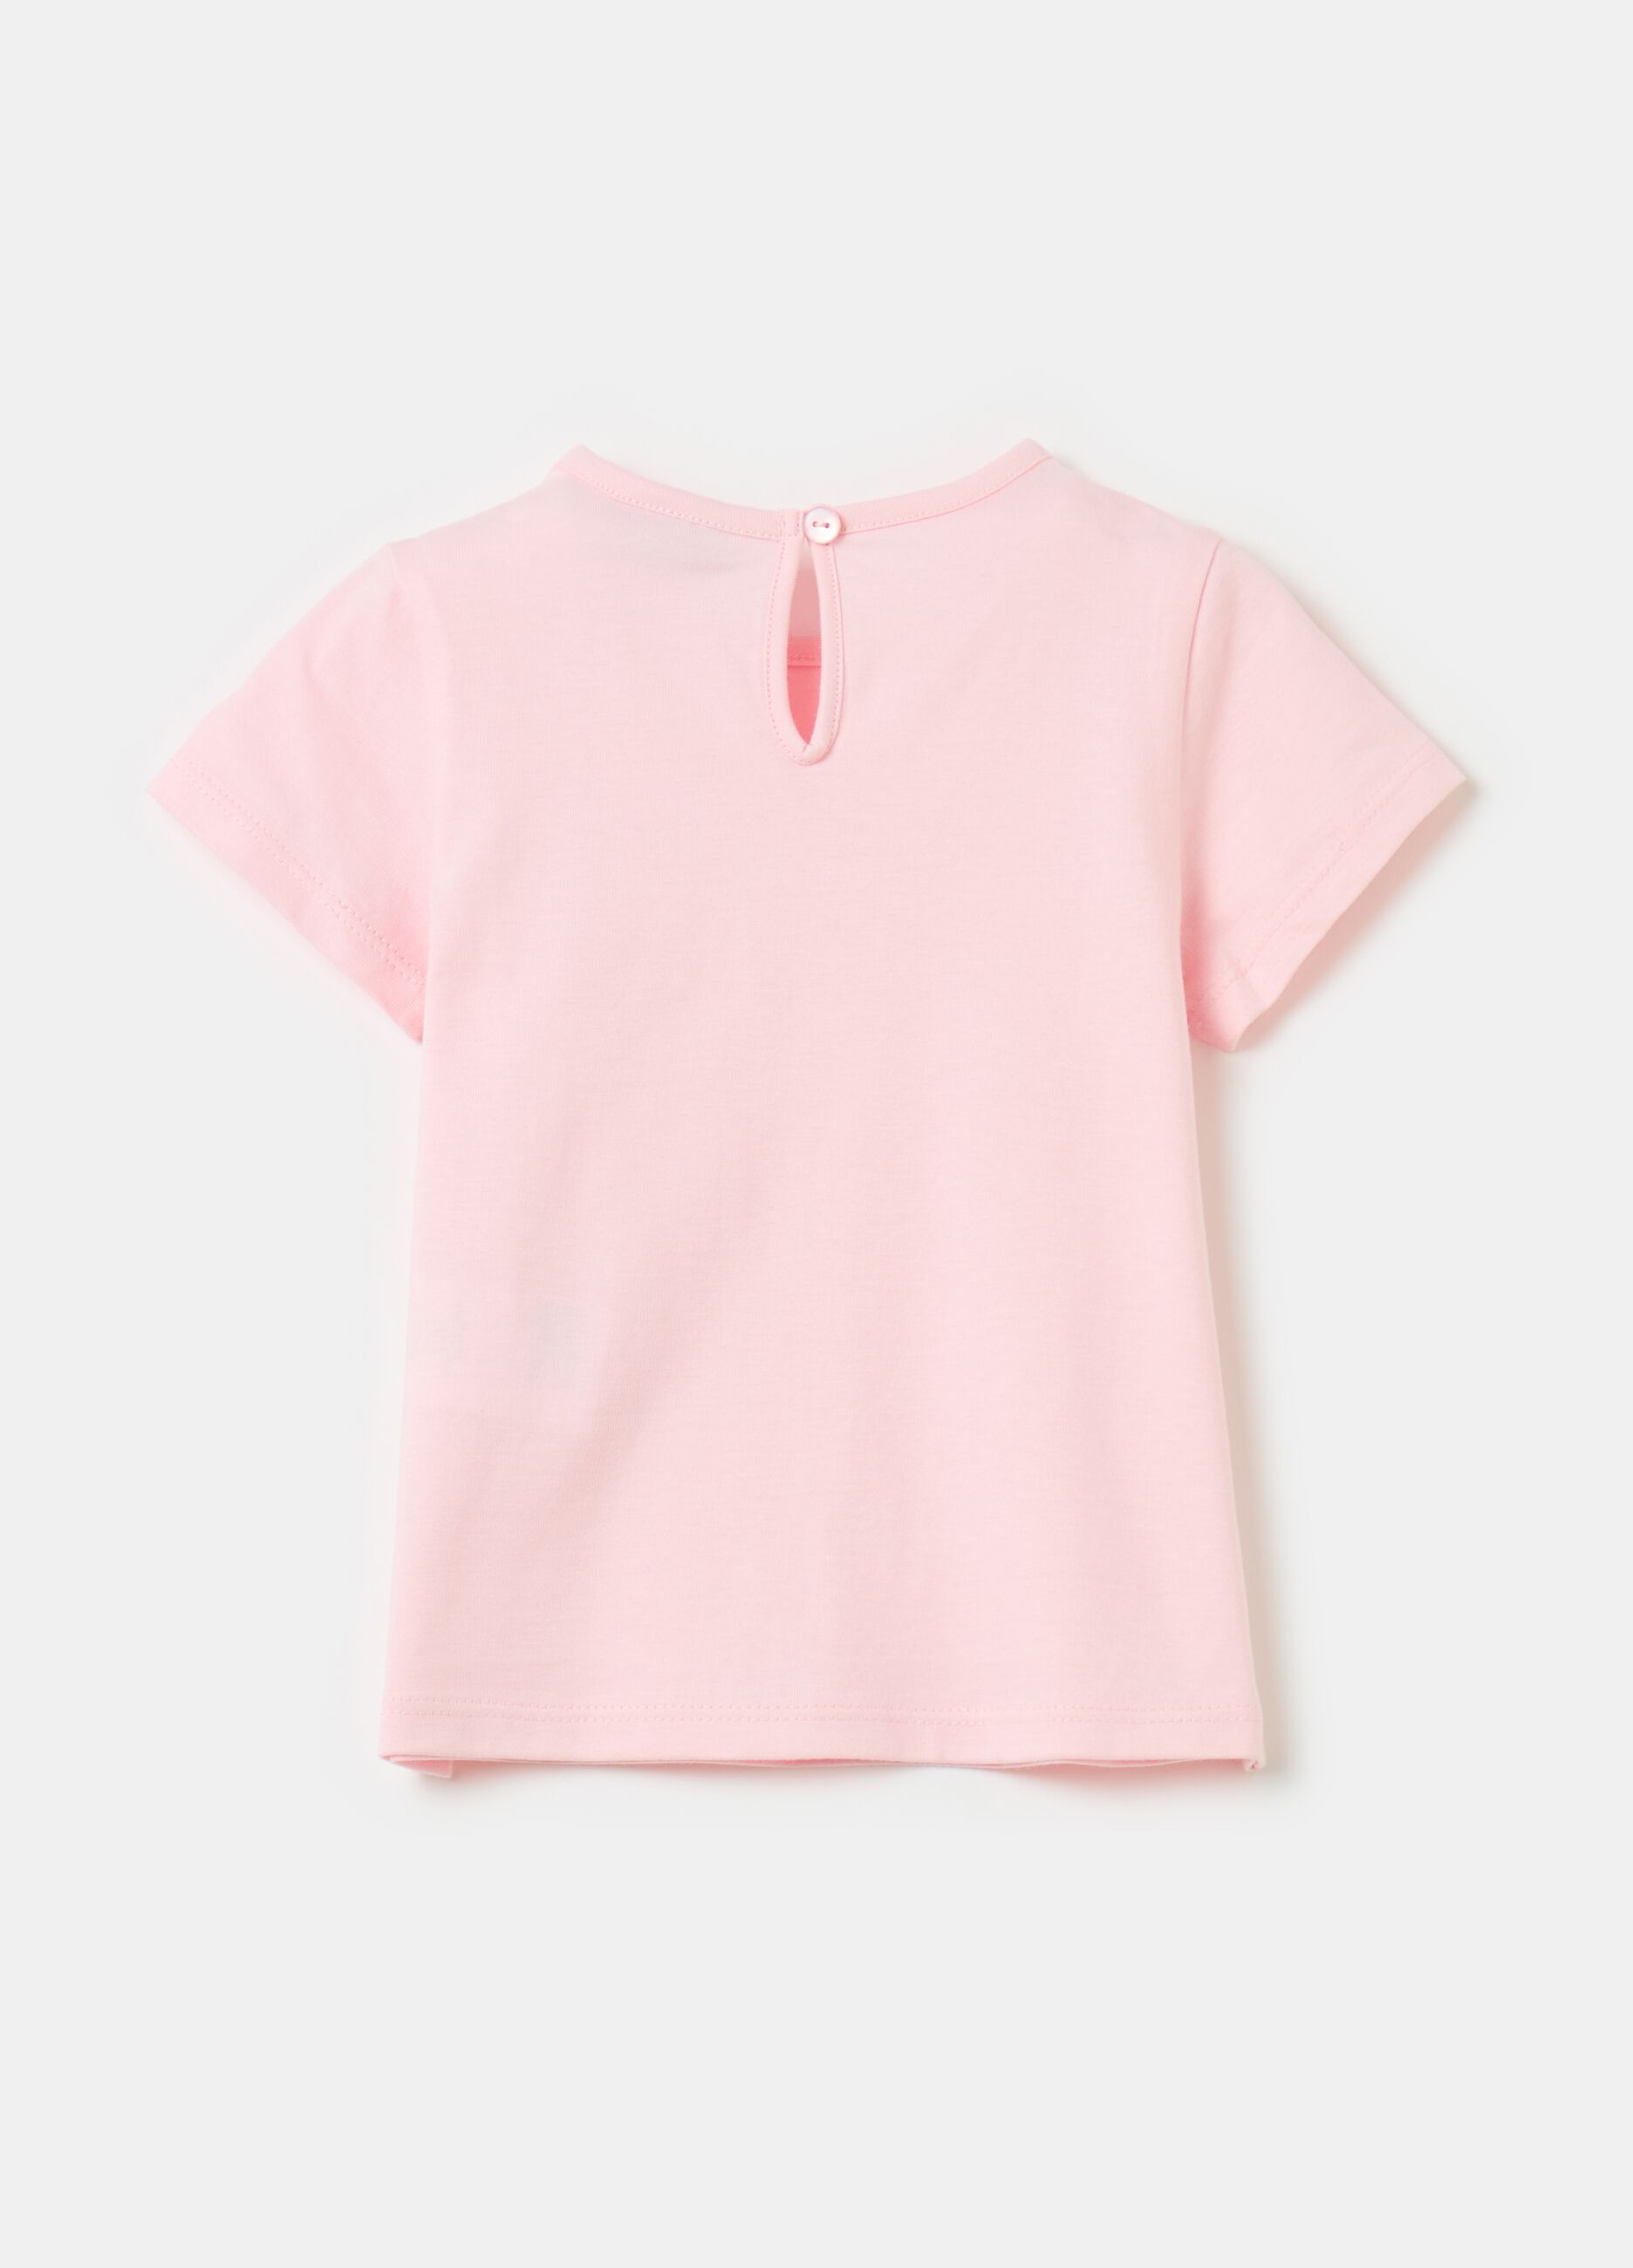 Cotton T-shirt with broderie anglaise detail